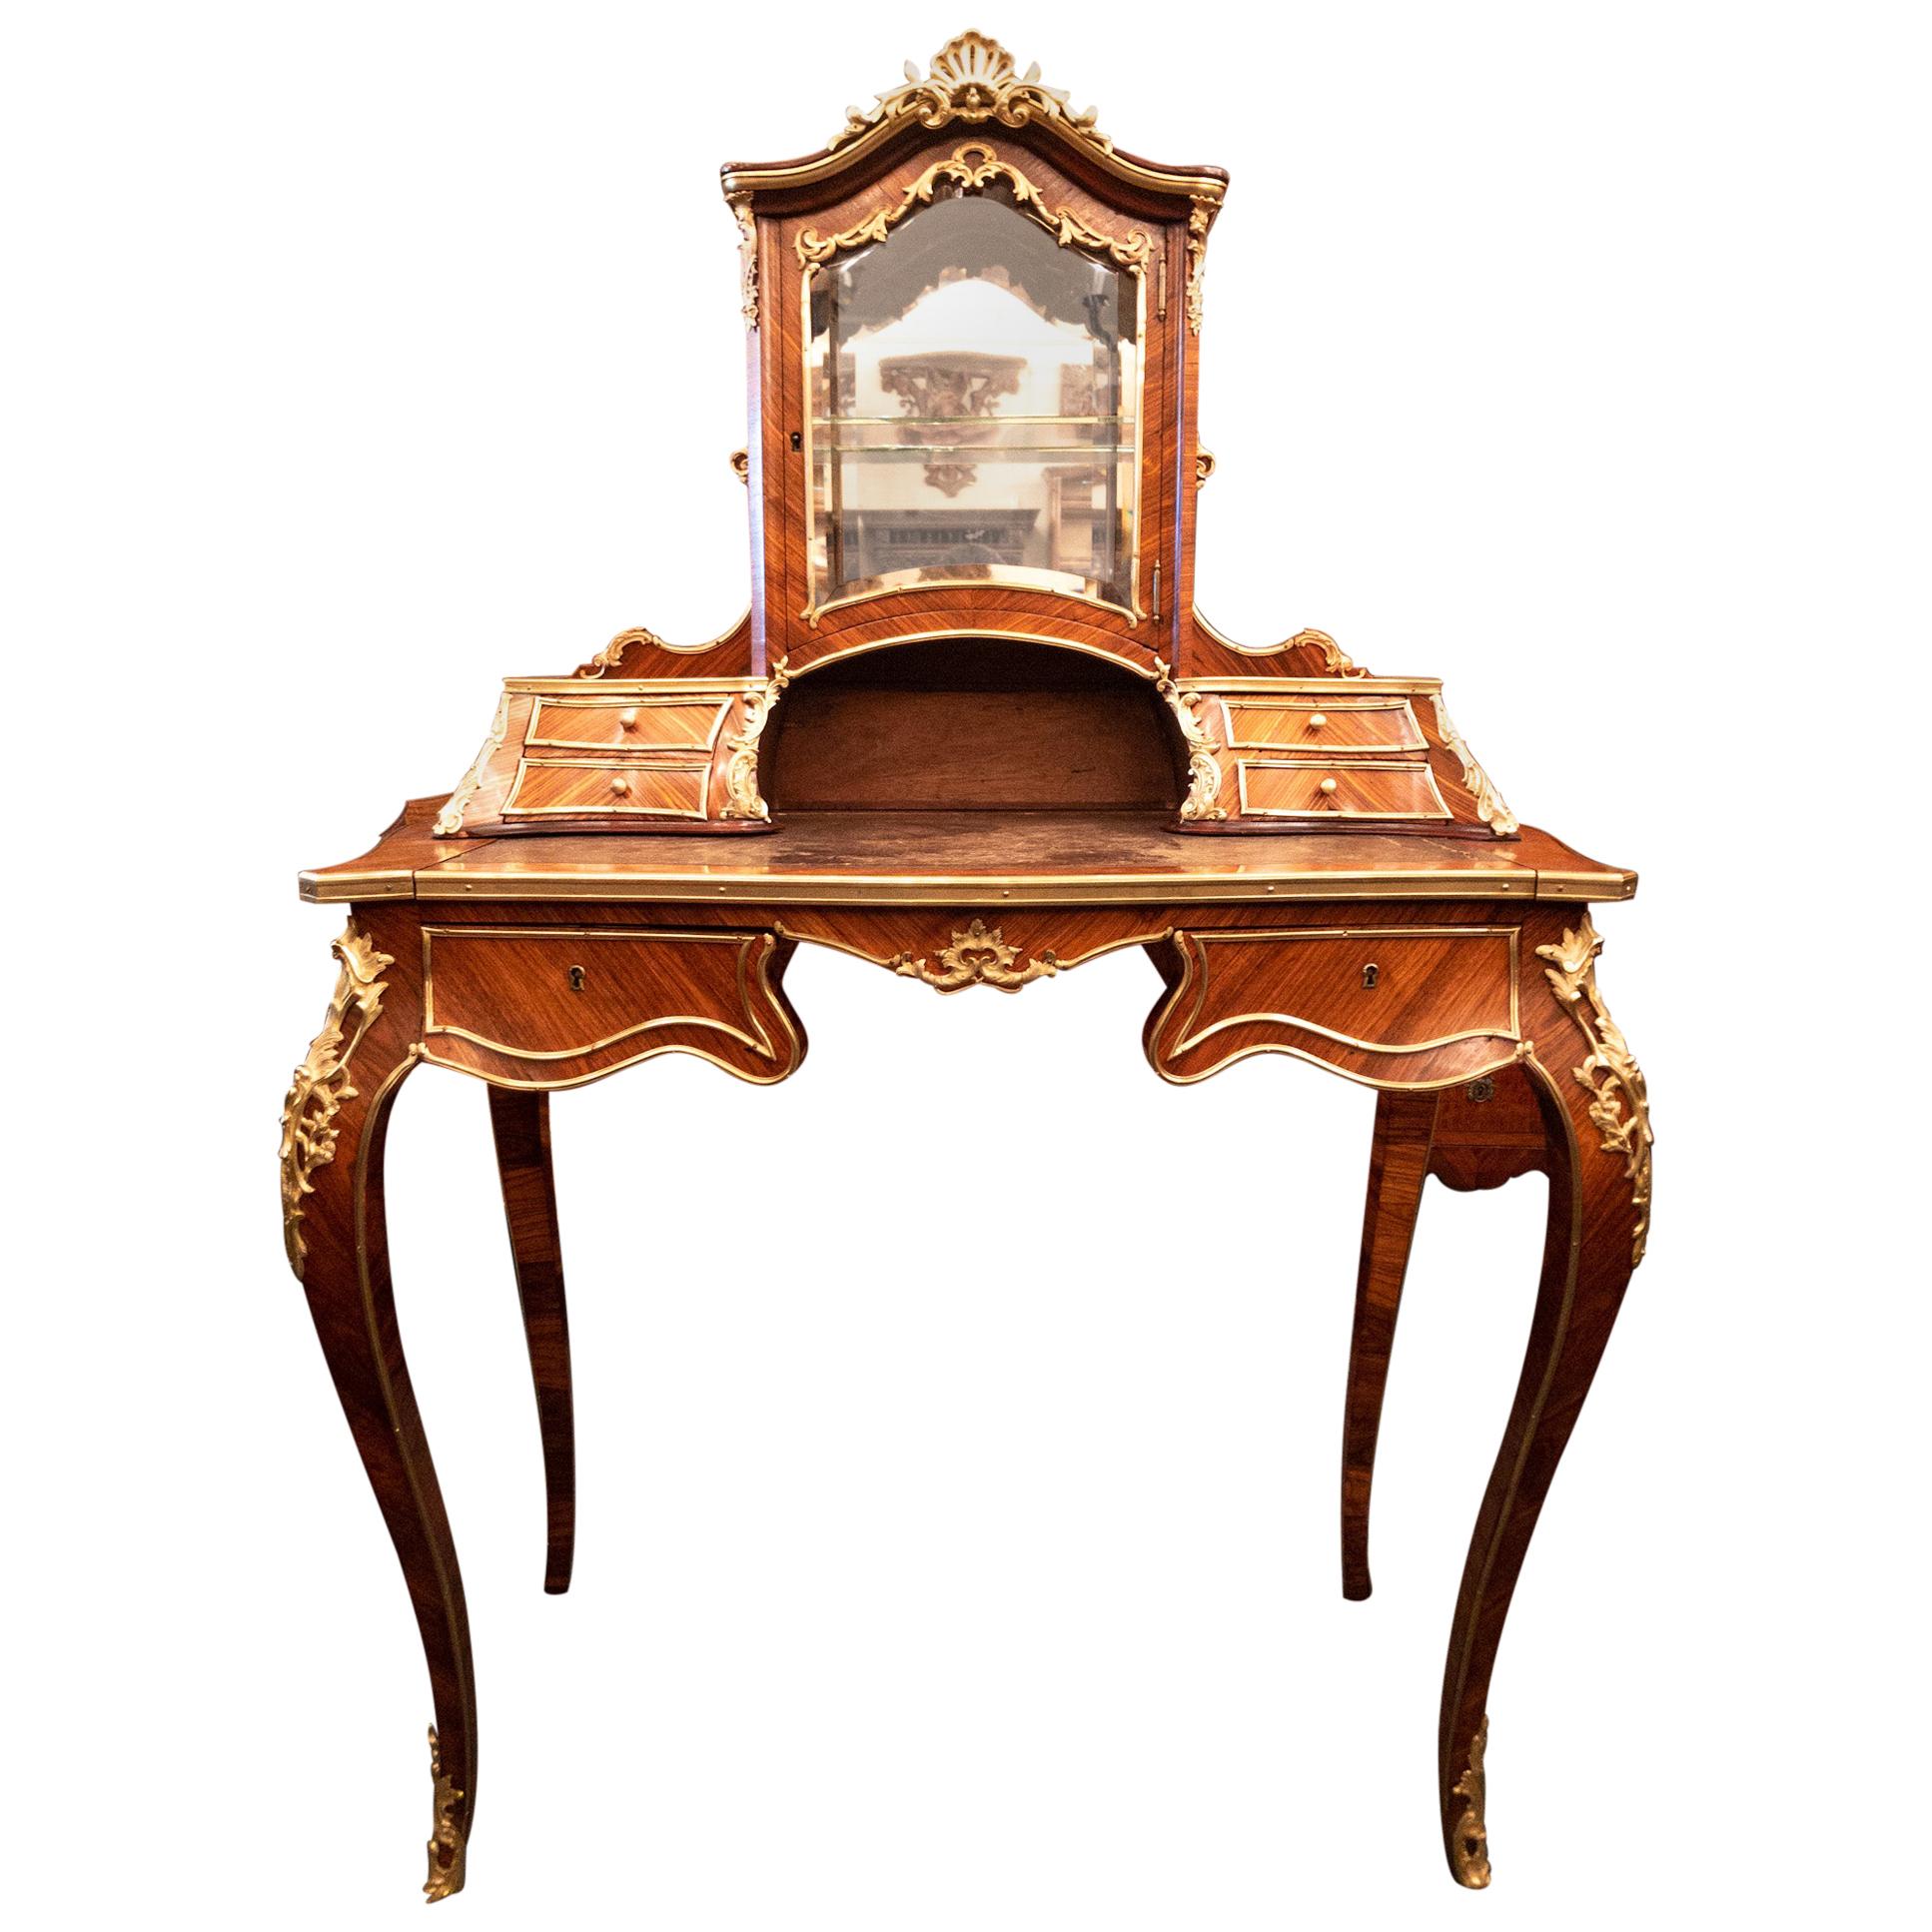 Antique French Rosewood and Gold Bronze Writing Desk, circa 1880-1890